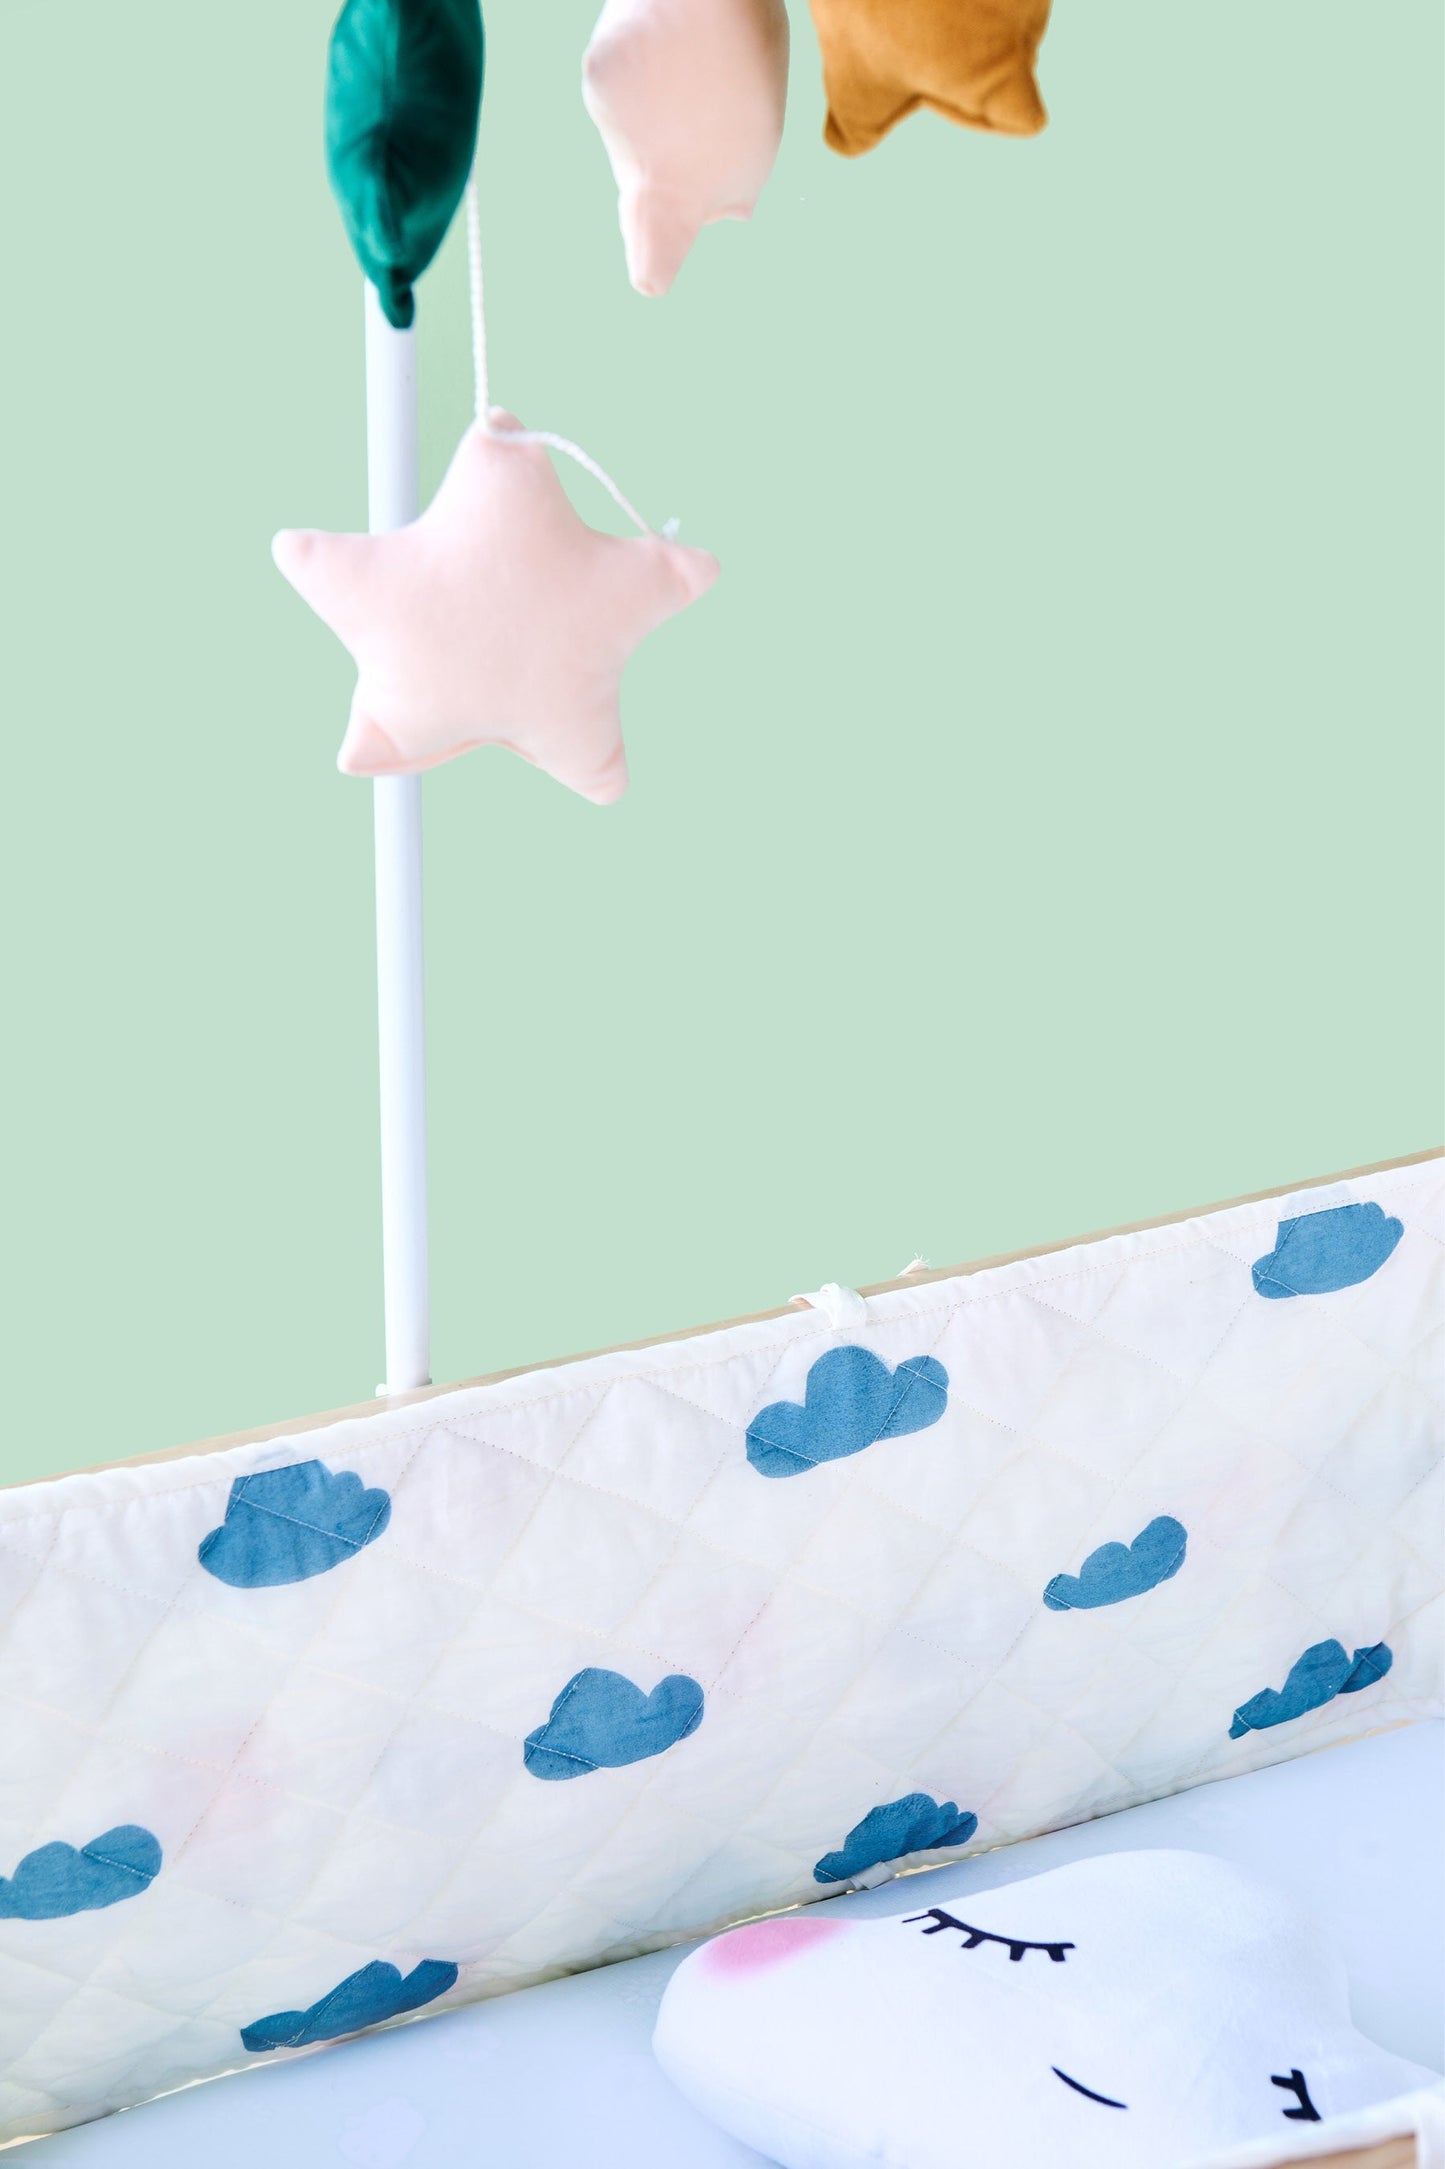 Reversible Muslin Baby Bed Bumper in Hot Air Balloon And The Clouds Print